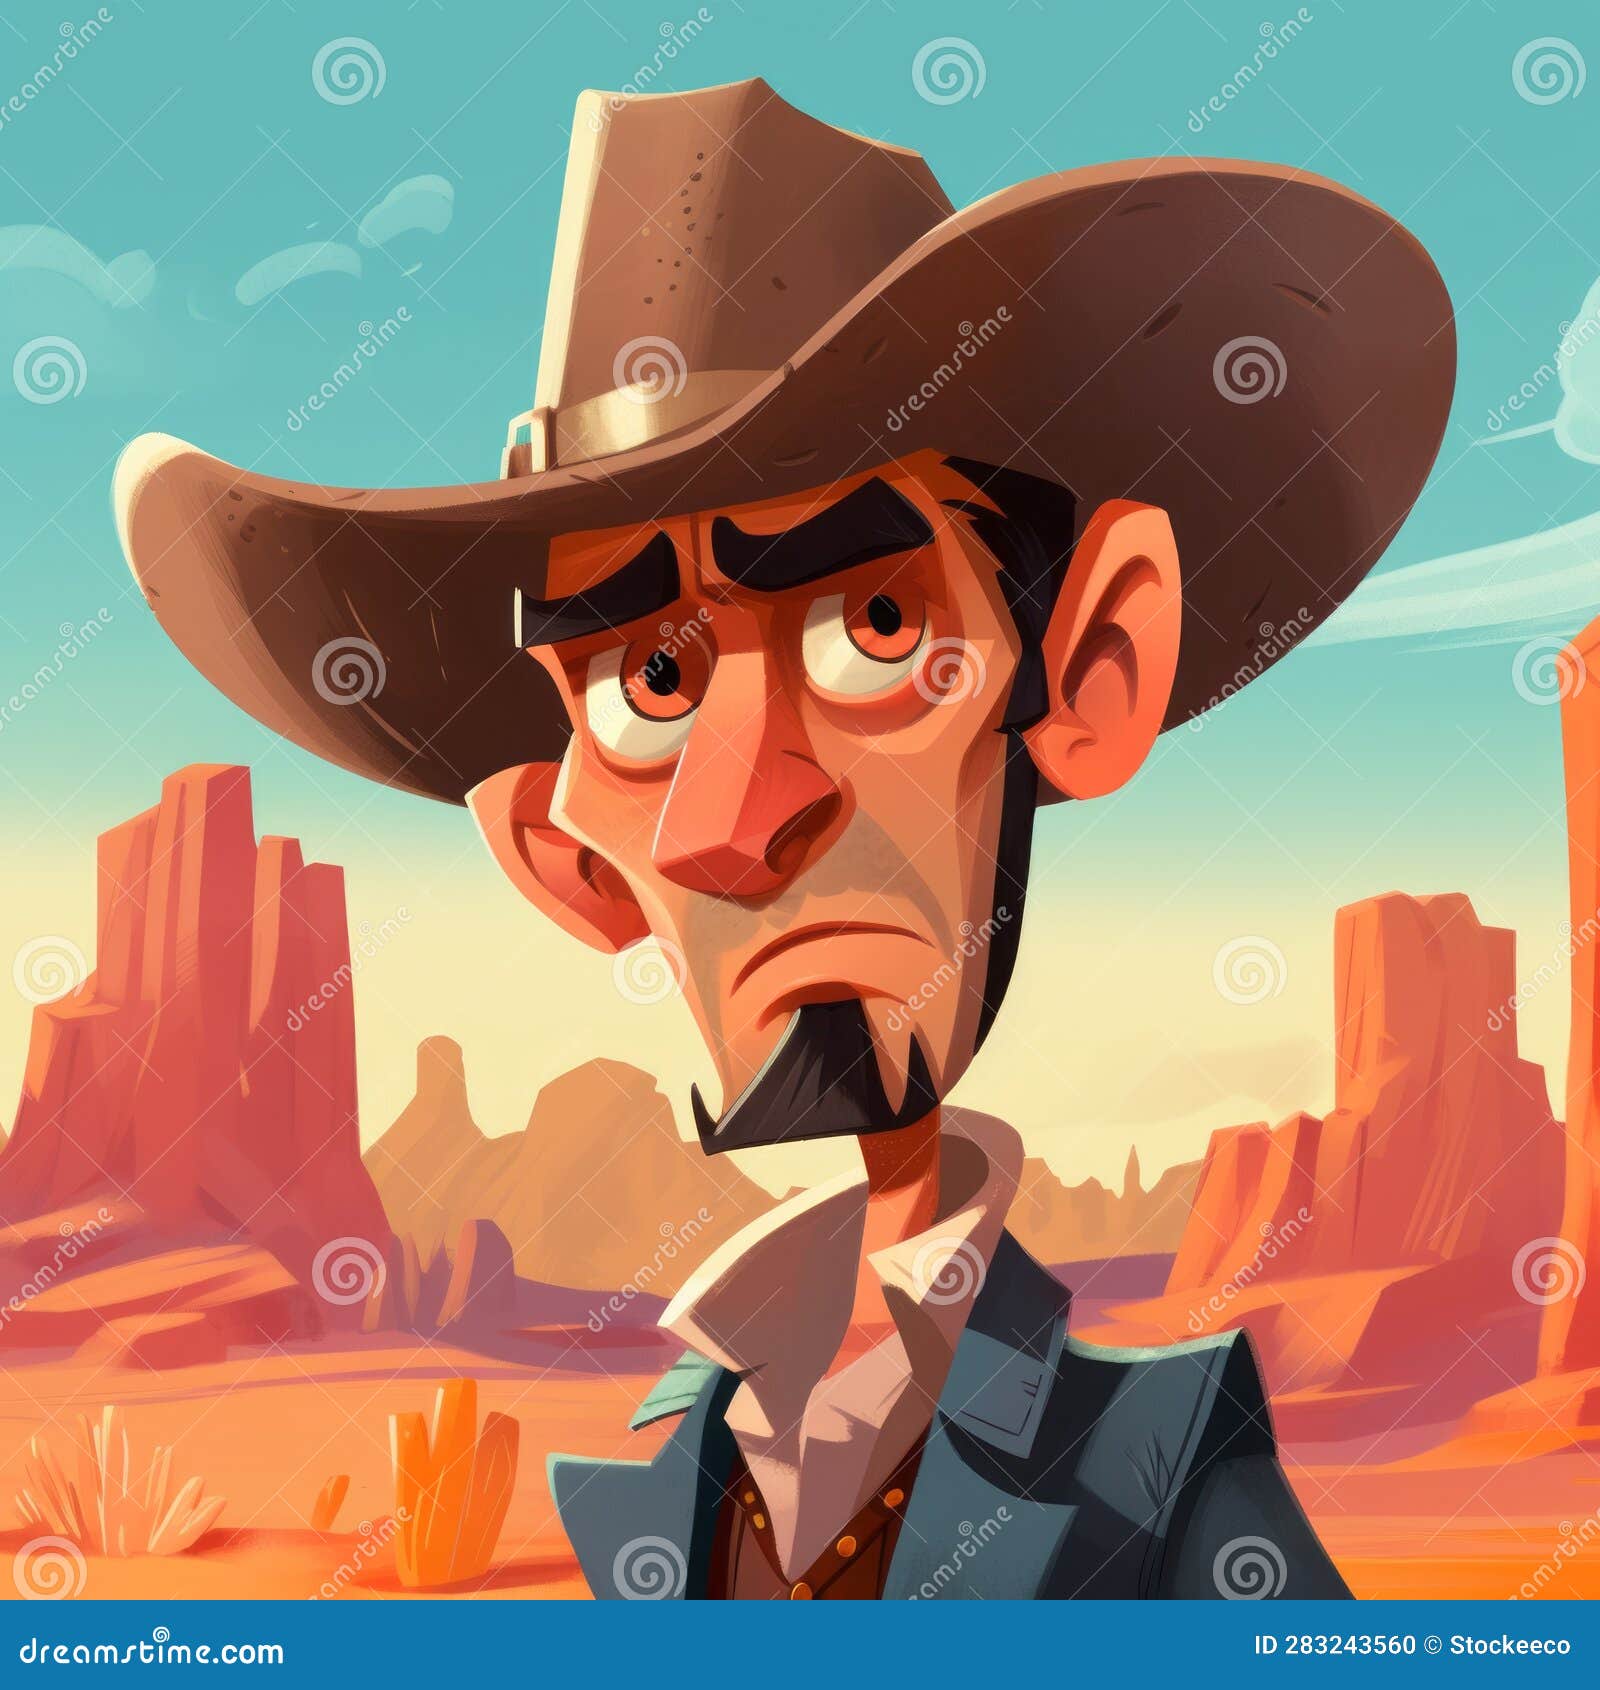 edgy caricature cowboy in western landscape nft